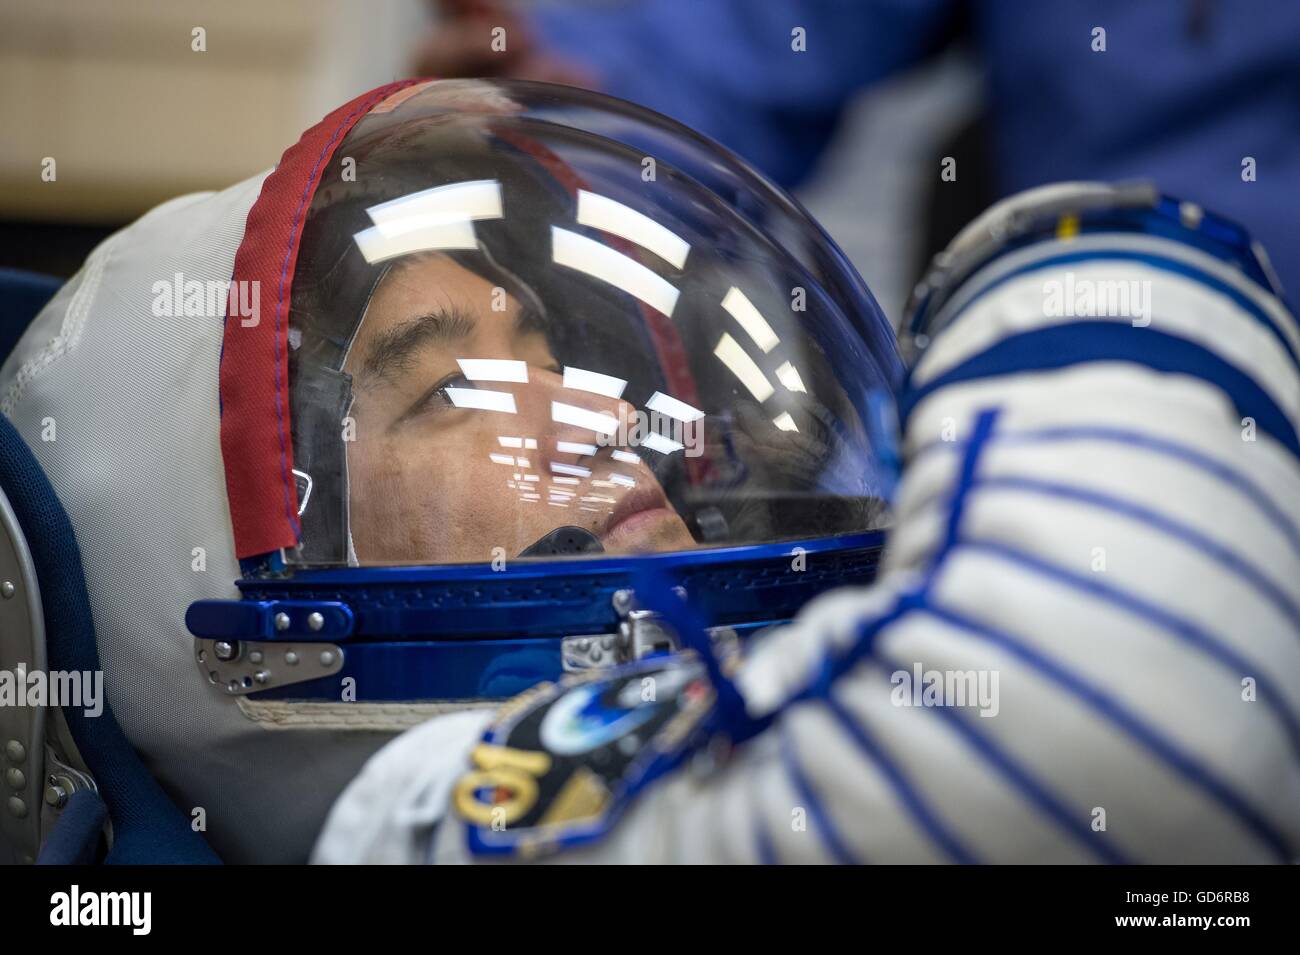 International Space Station Expedition 48 Japanese astronaut Takuya Onishi is suited up in his Russian Sokol launch and entry suit in preparation for launch July 7, 2016 at the Baikonur Cosmodrome in Kazakhstan. Rubens joins crew members Russian cosmonaut Anatoly Ivanishin and Japanese astronaut Takuya Onishi on four-month mission. Stock Photo